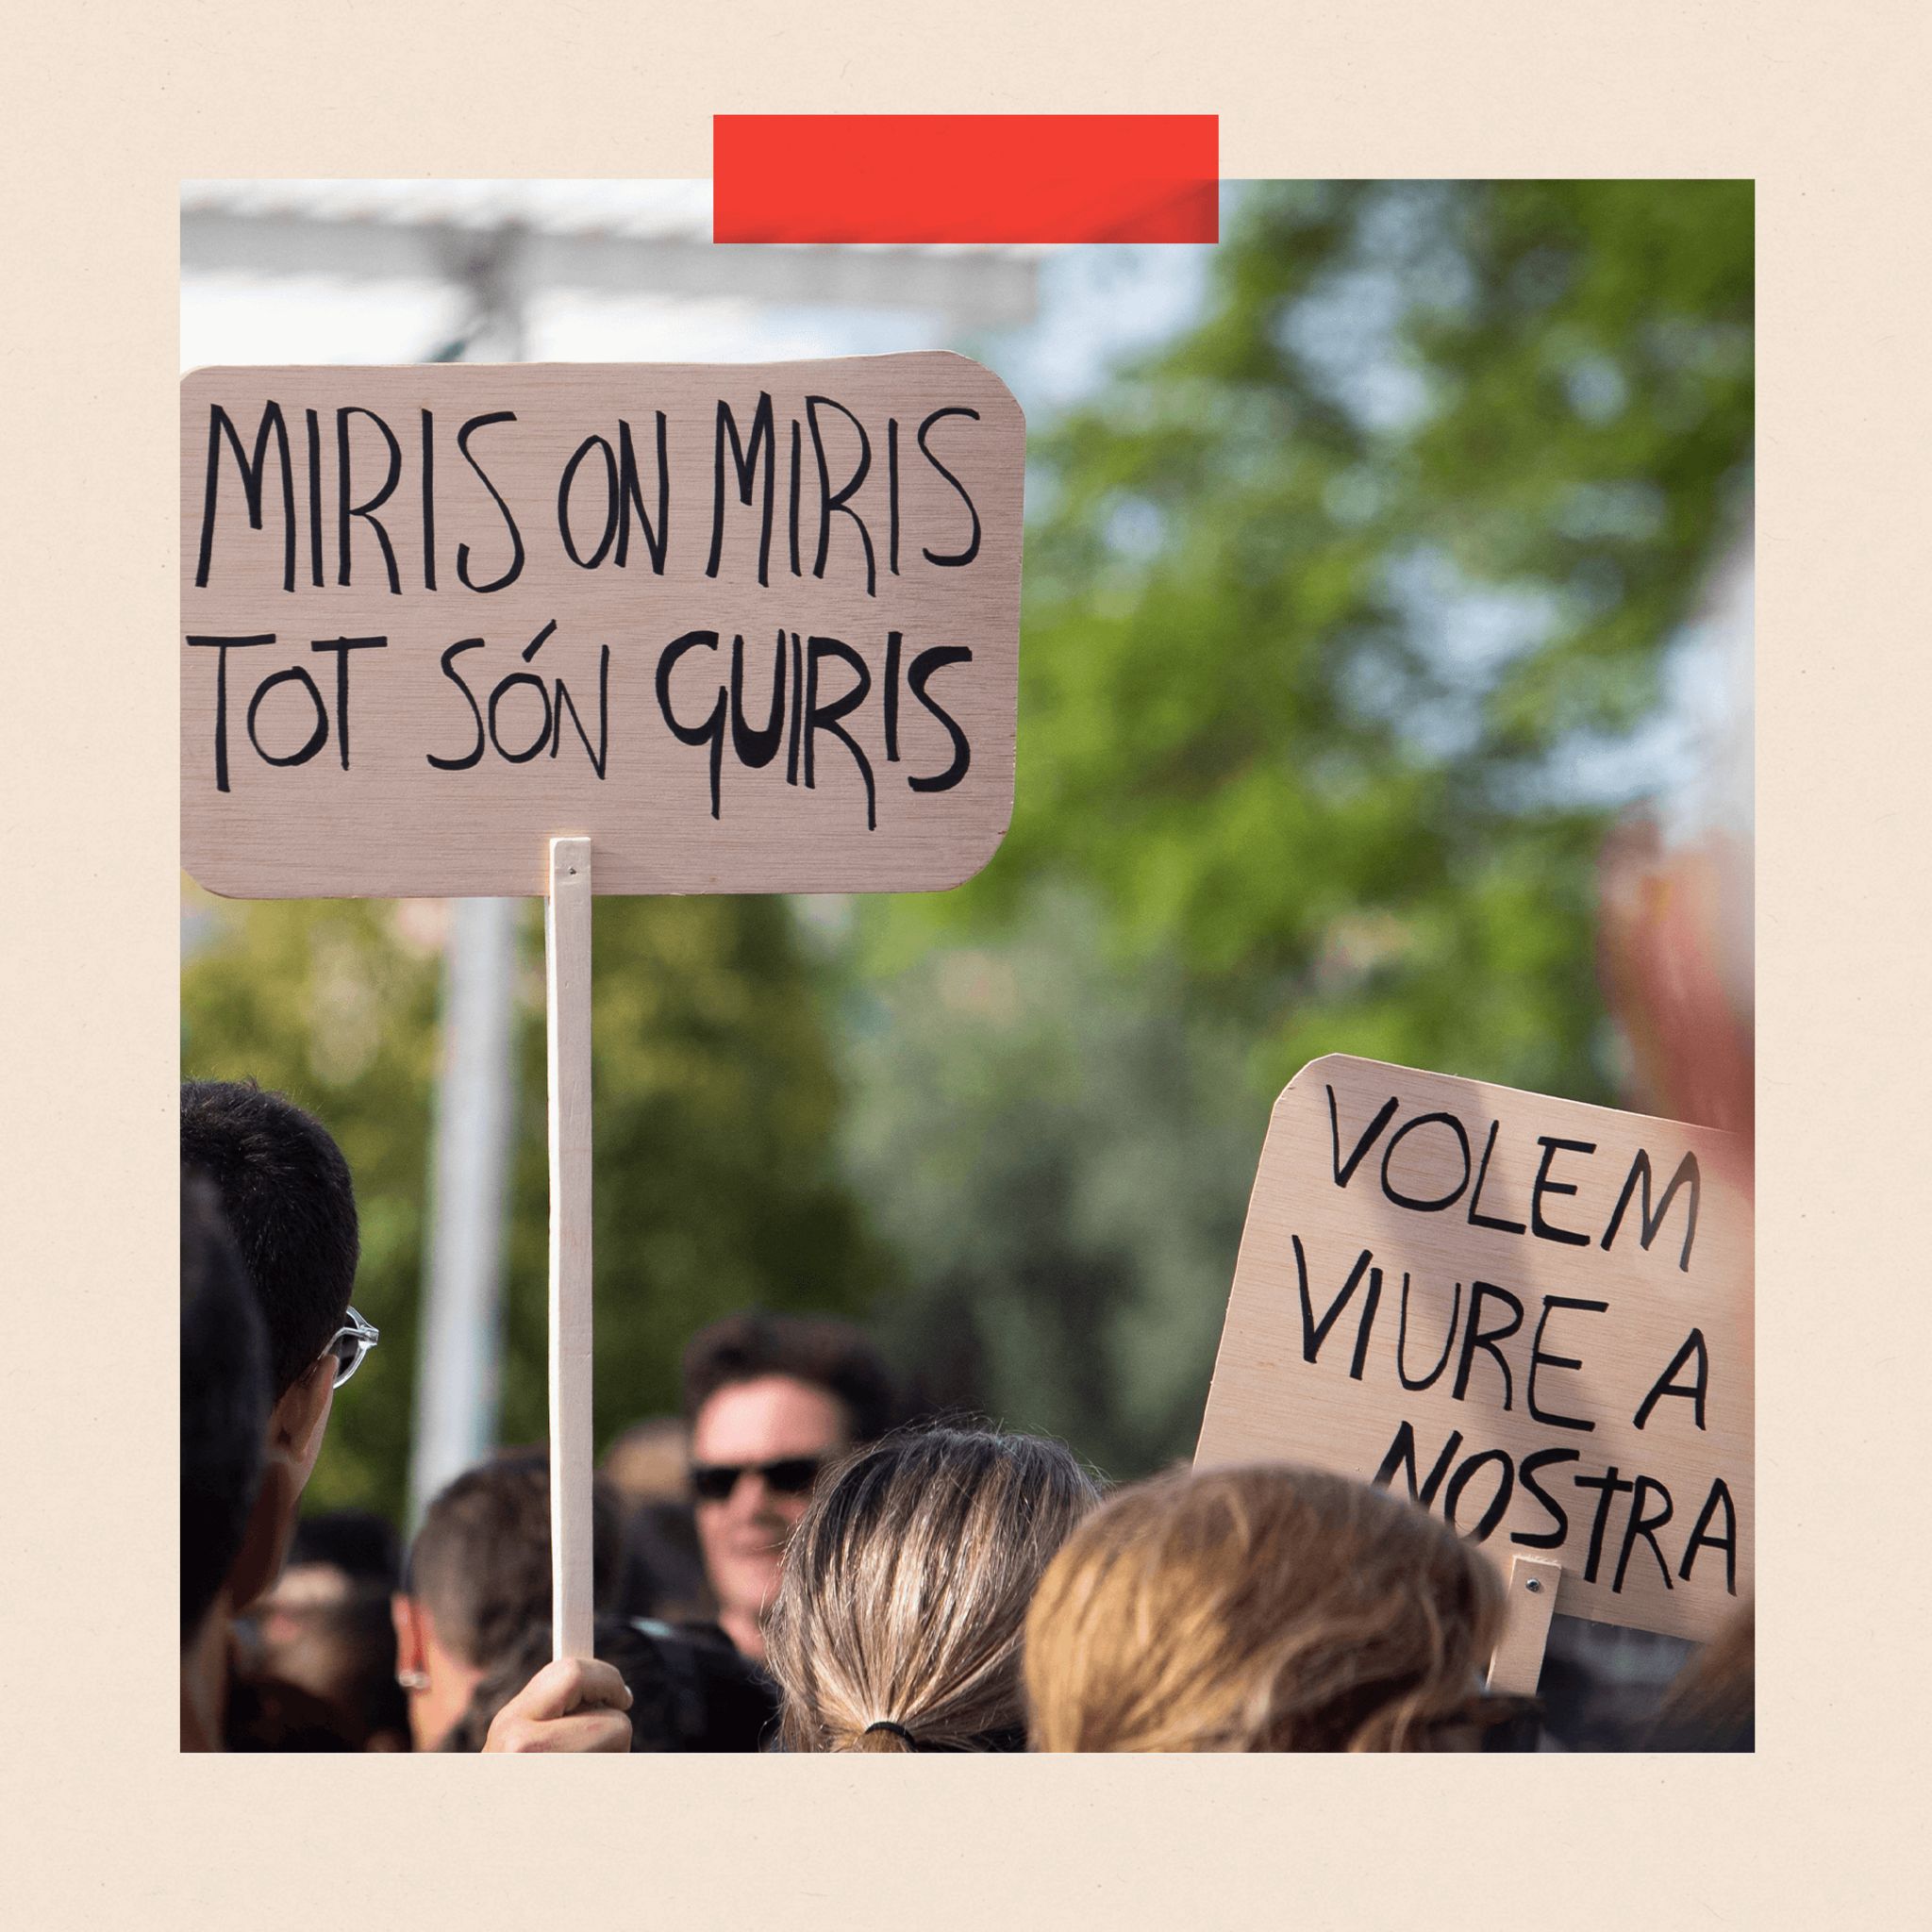 A sign that says: "Miris on miris tot son guiris". In English this means "Everywhere you look everyone is foreign"